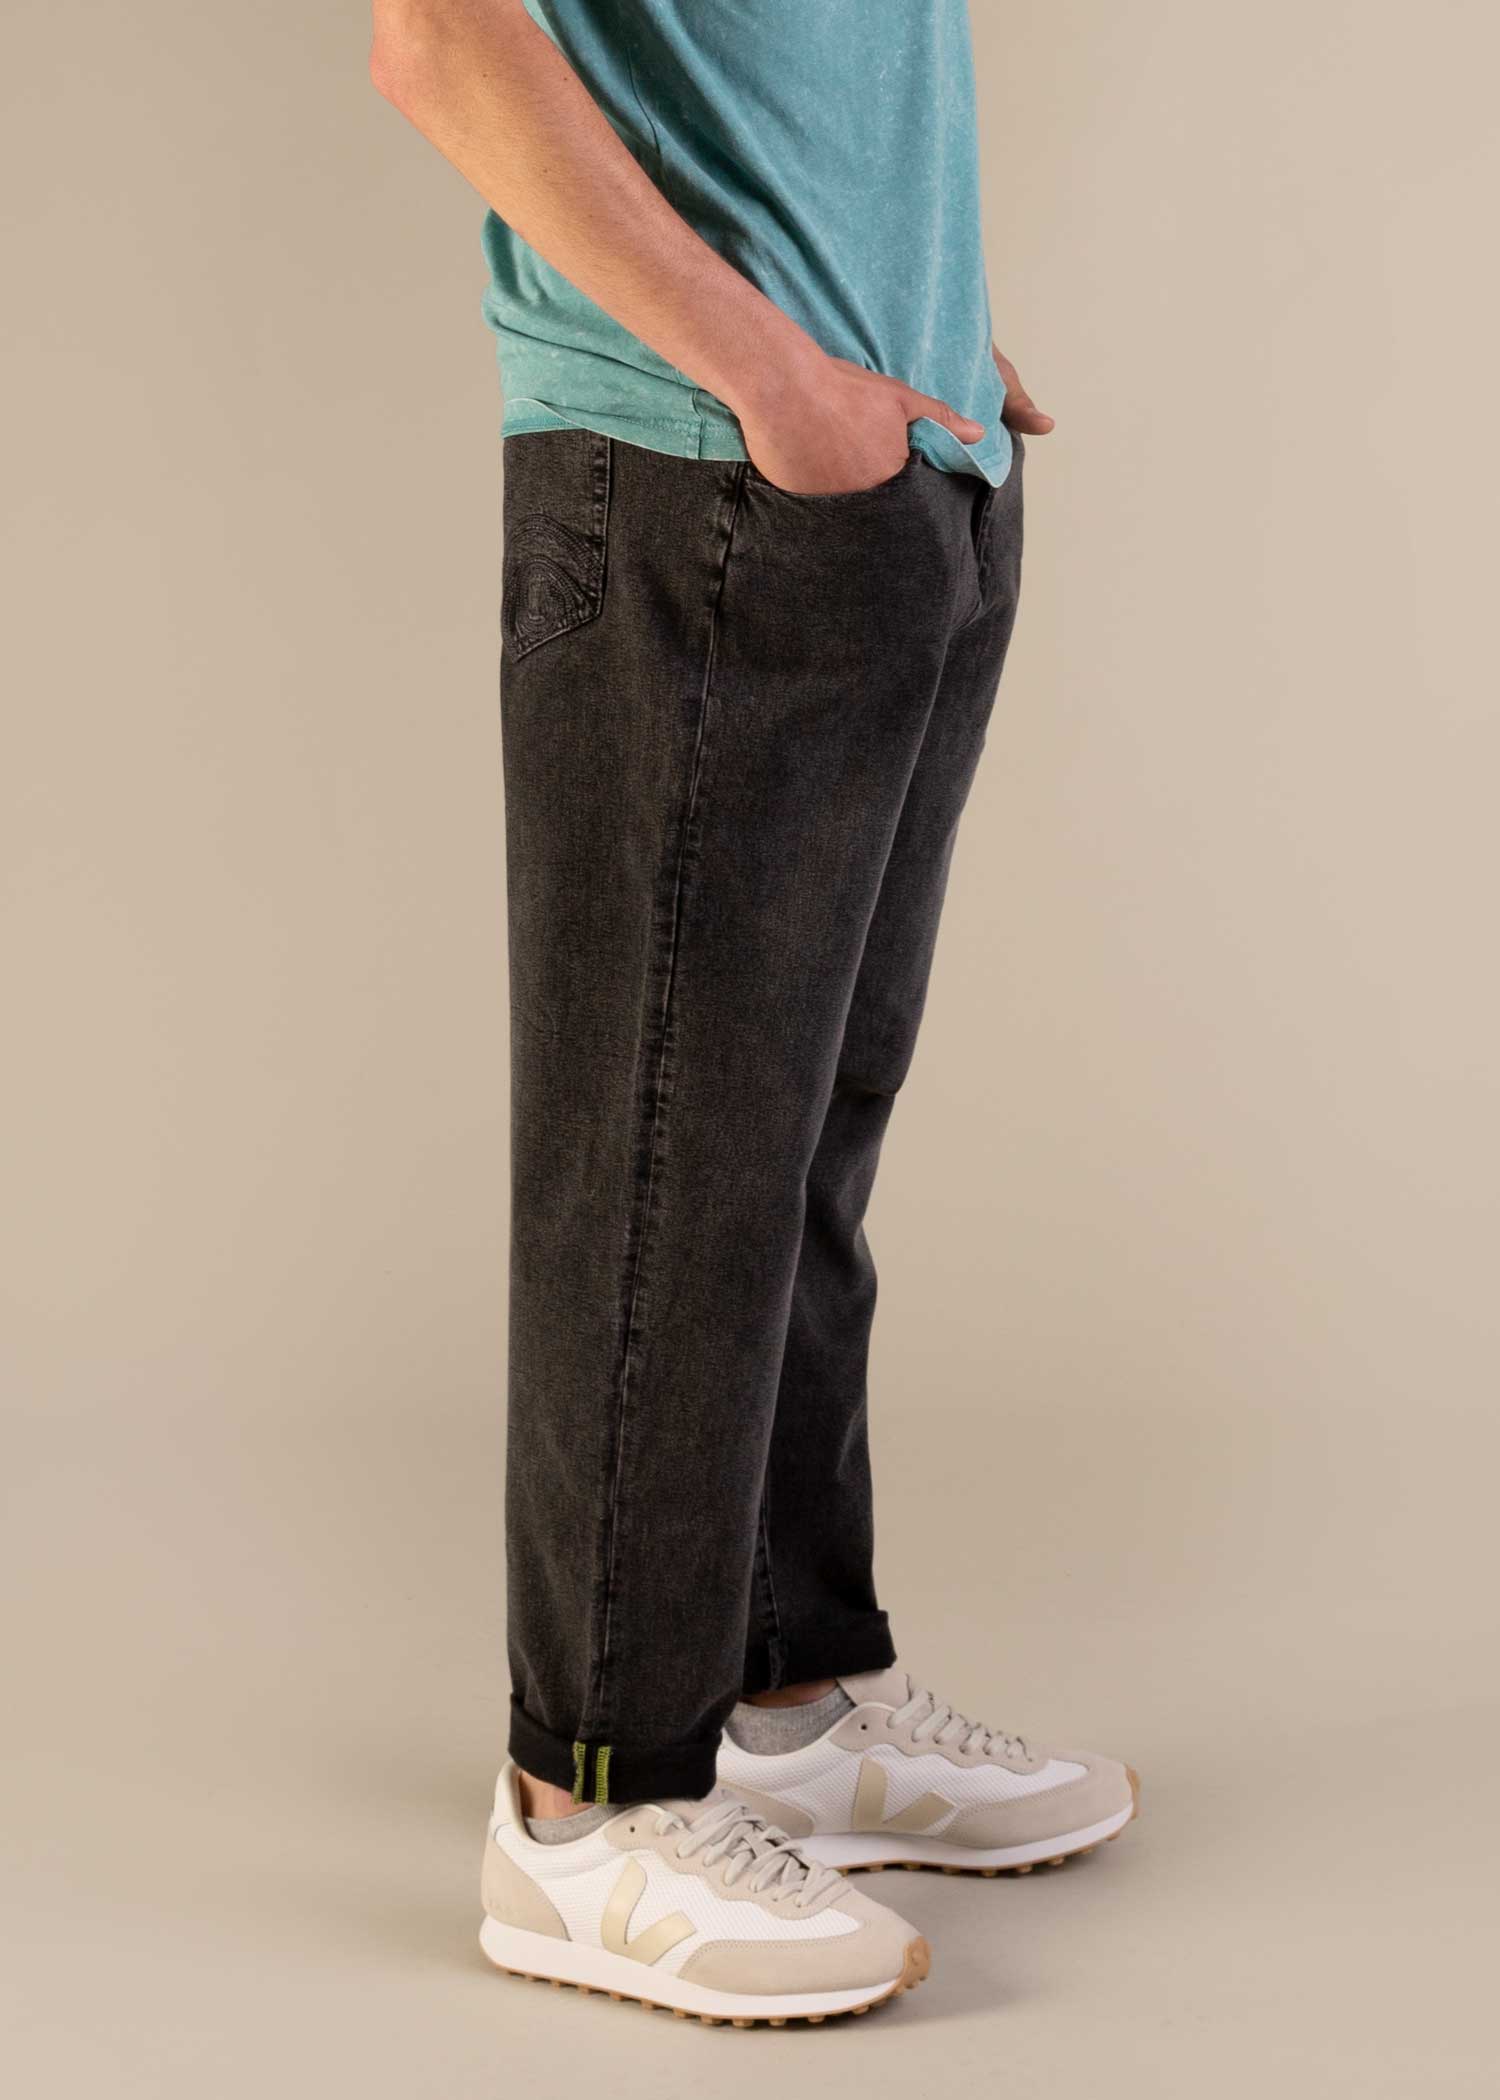 3RD ROCK active jeans for everyday - Kai is 6ft 1" with a 32" waist & 33" inseam, and is wearing a 32 RL. M